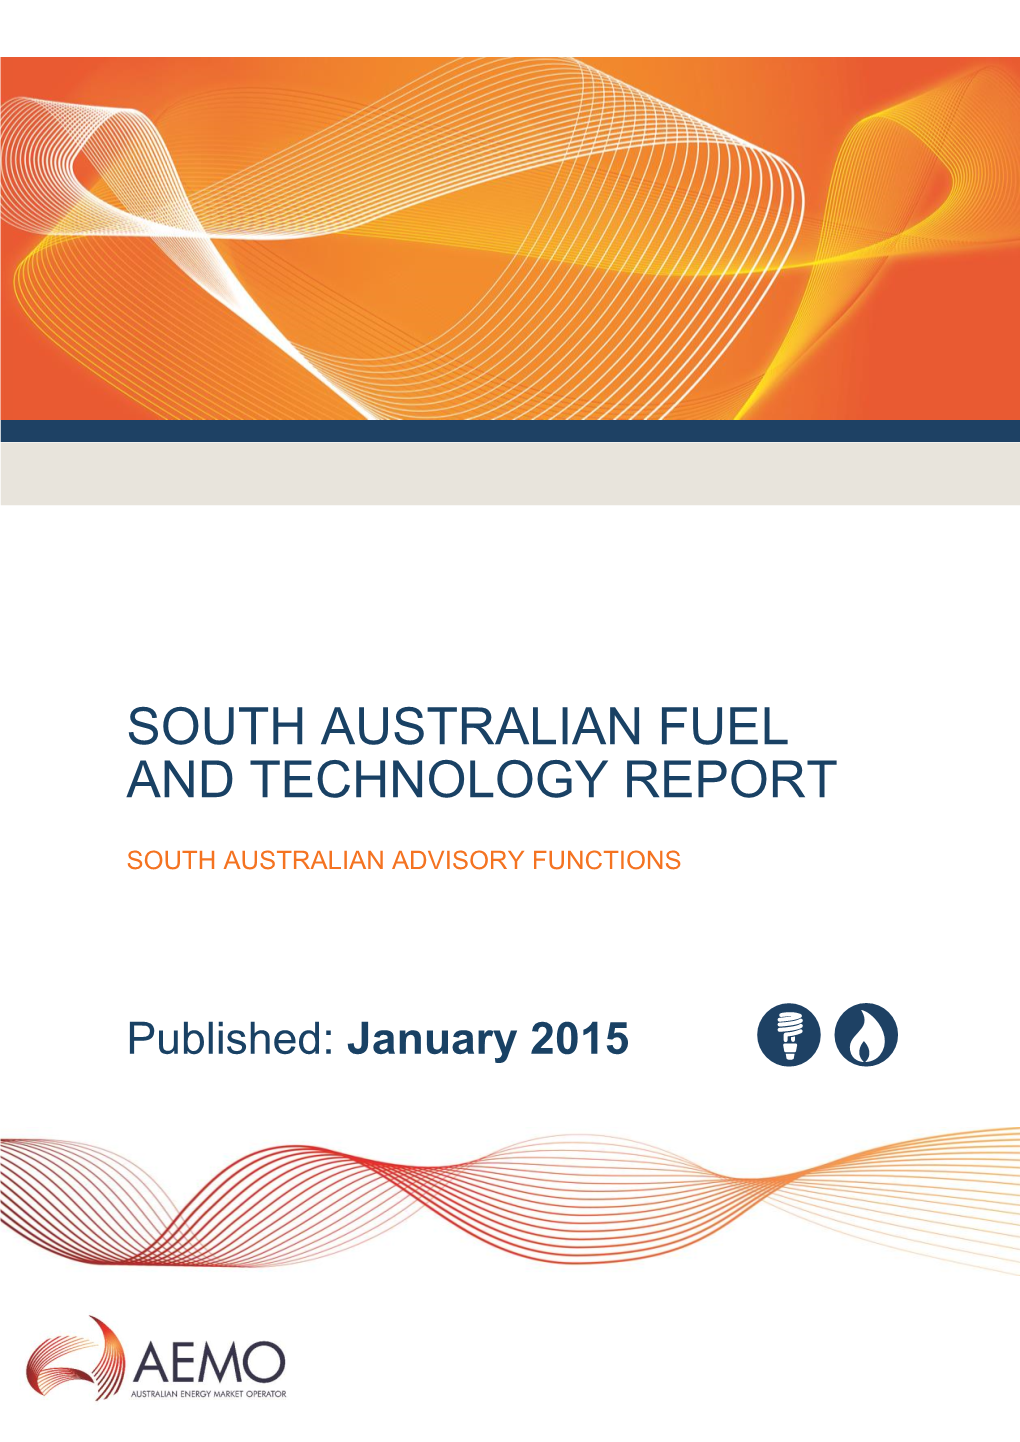 South Australian Fuel and Technology Report